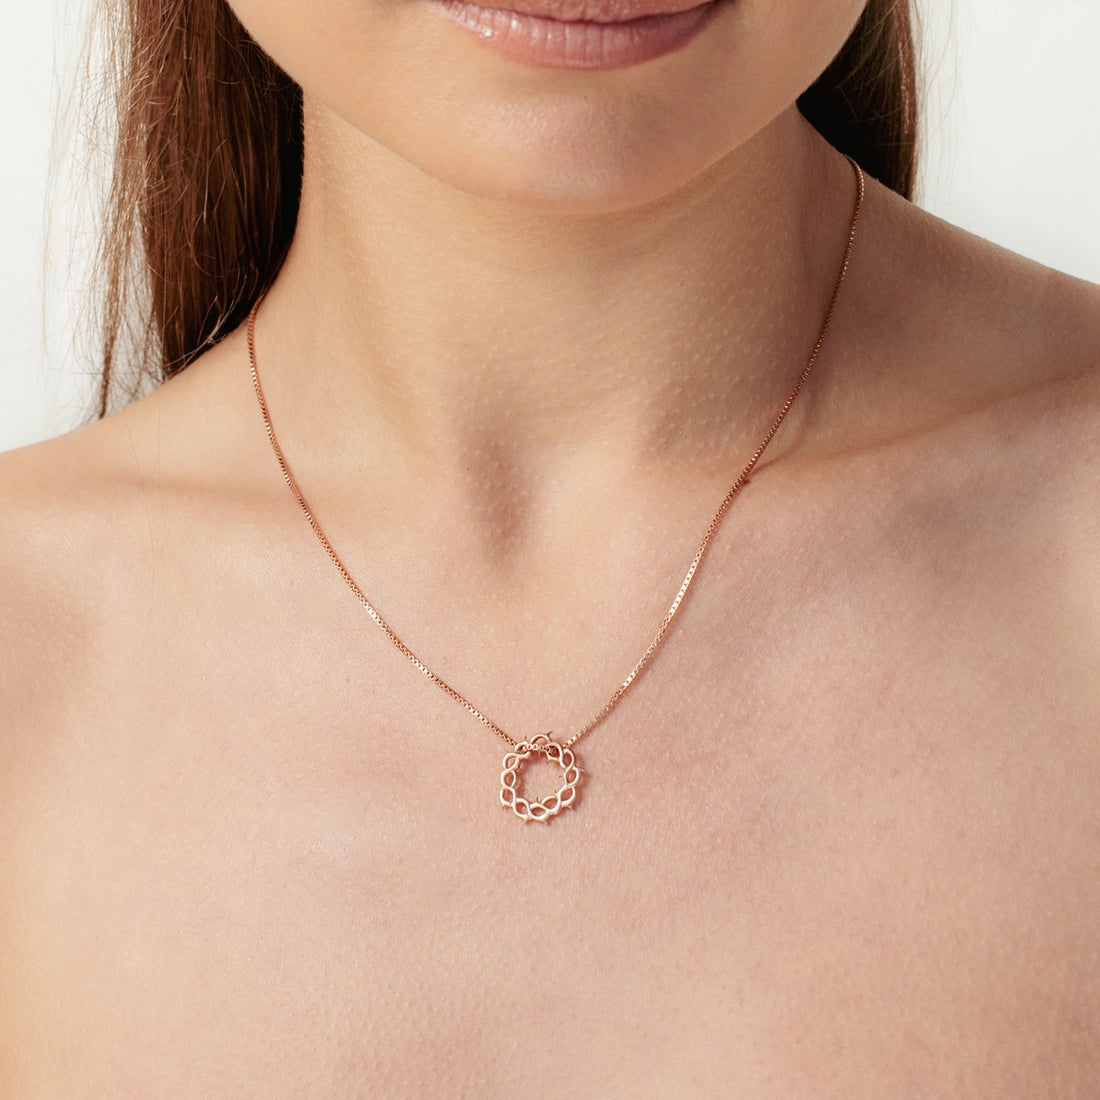 Close up of christian woman wearing the 18k rose gold vermeil crown of thorns necklace from the Insignia Collection by Rizen Jewelry.